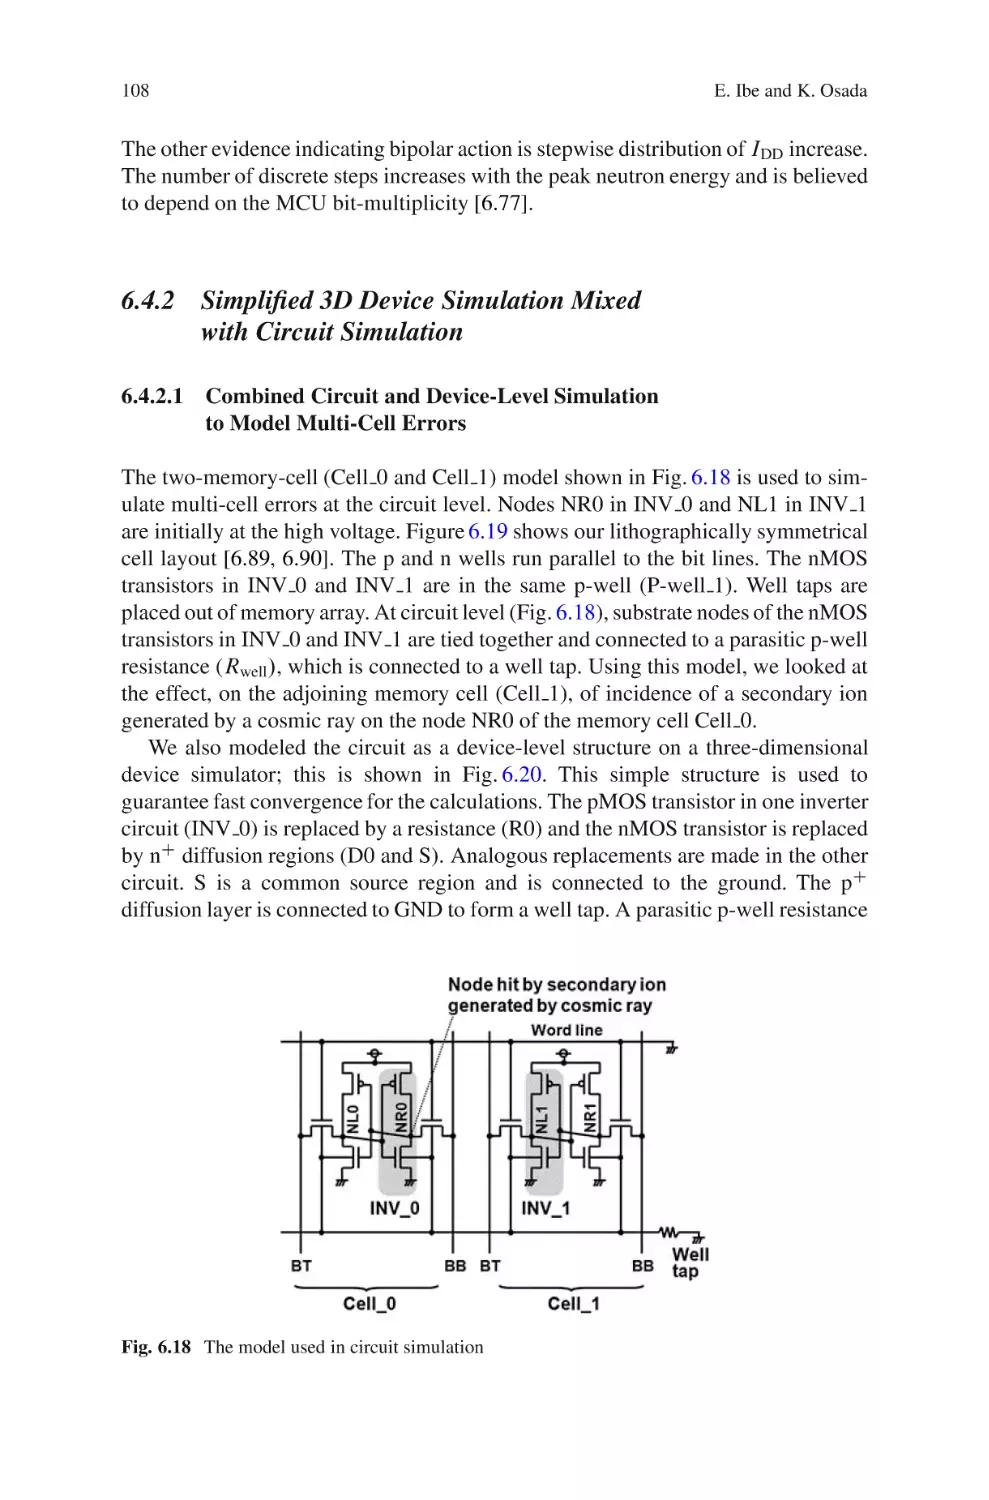 6.4.2 Simplified 3D Device Simulation Mixed with Circuit Simulation
6.4.2.1 Combined Circuit and Device-Level Simulation to Model Multi-Cell Errors